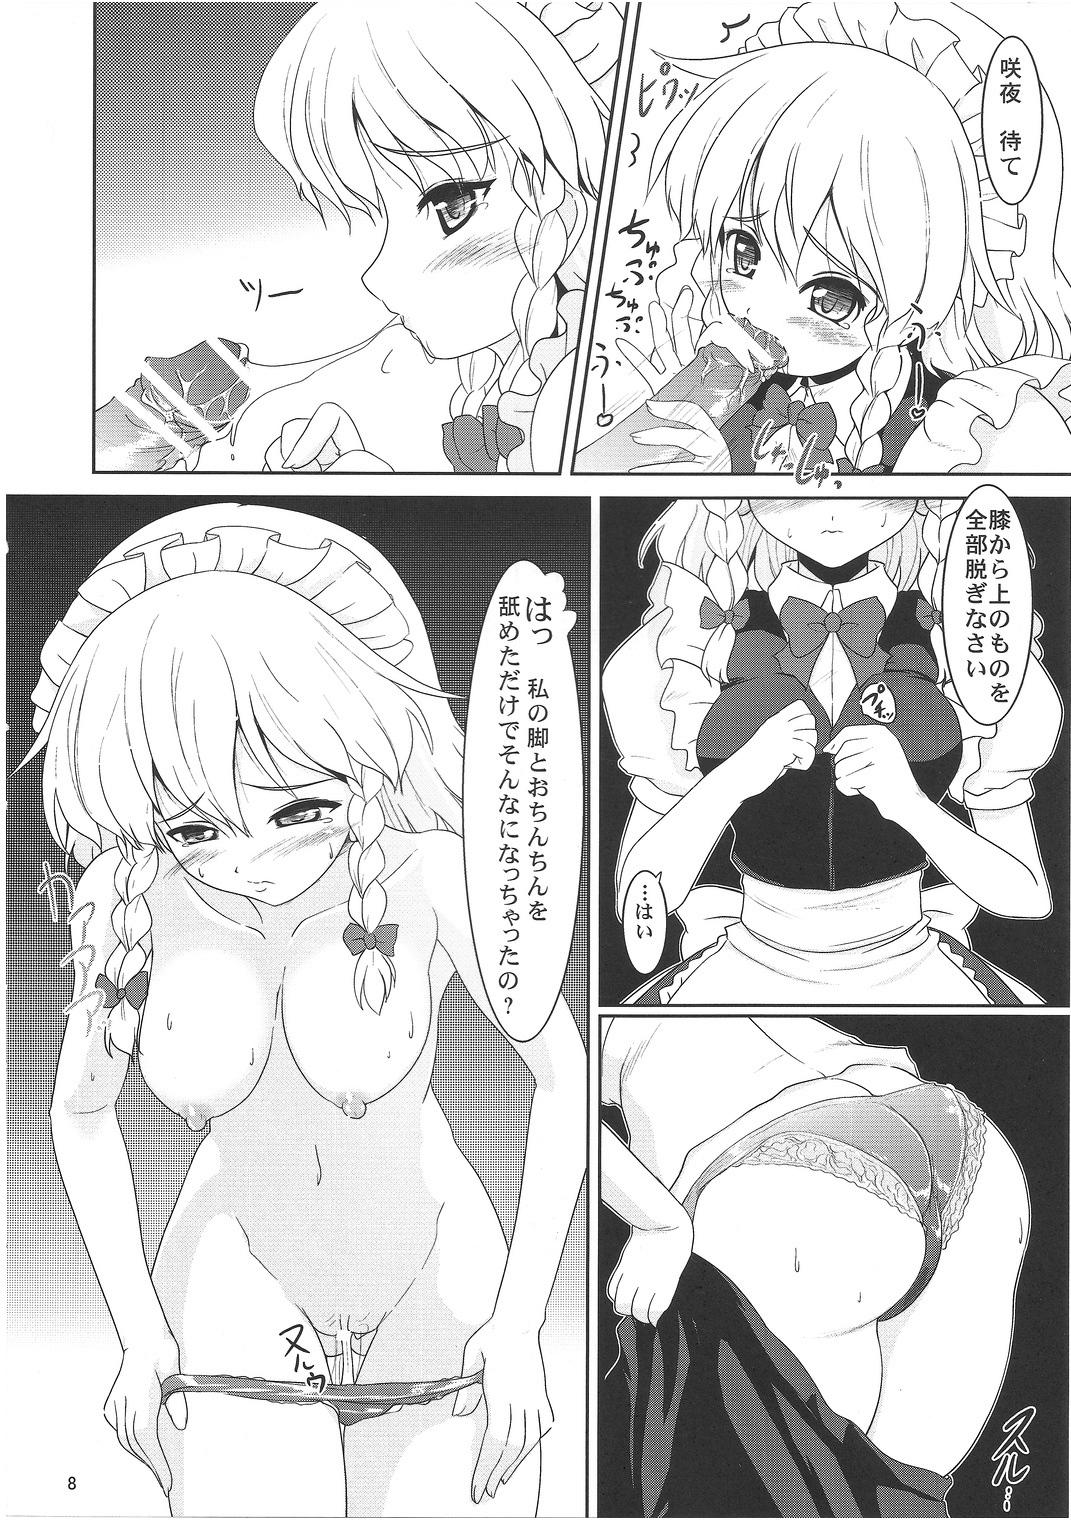 Cocks Maid or Dog - Touhou project Panties - Page 7